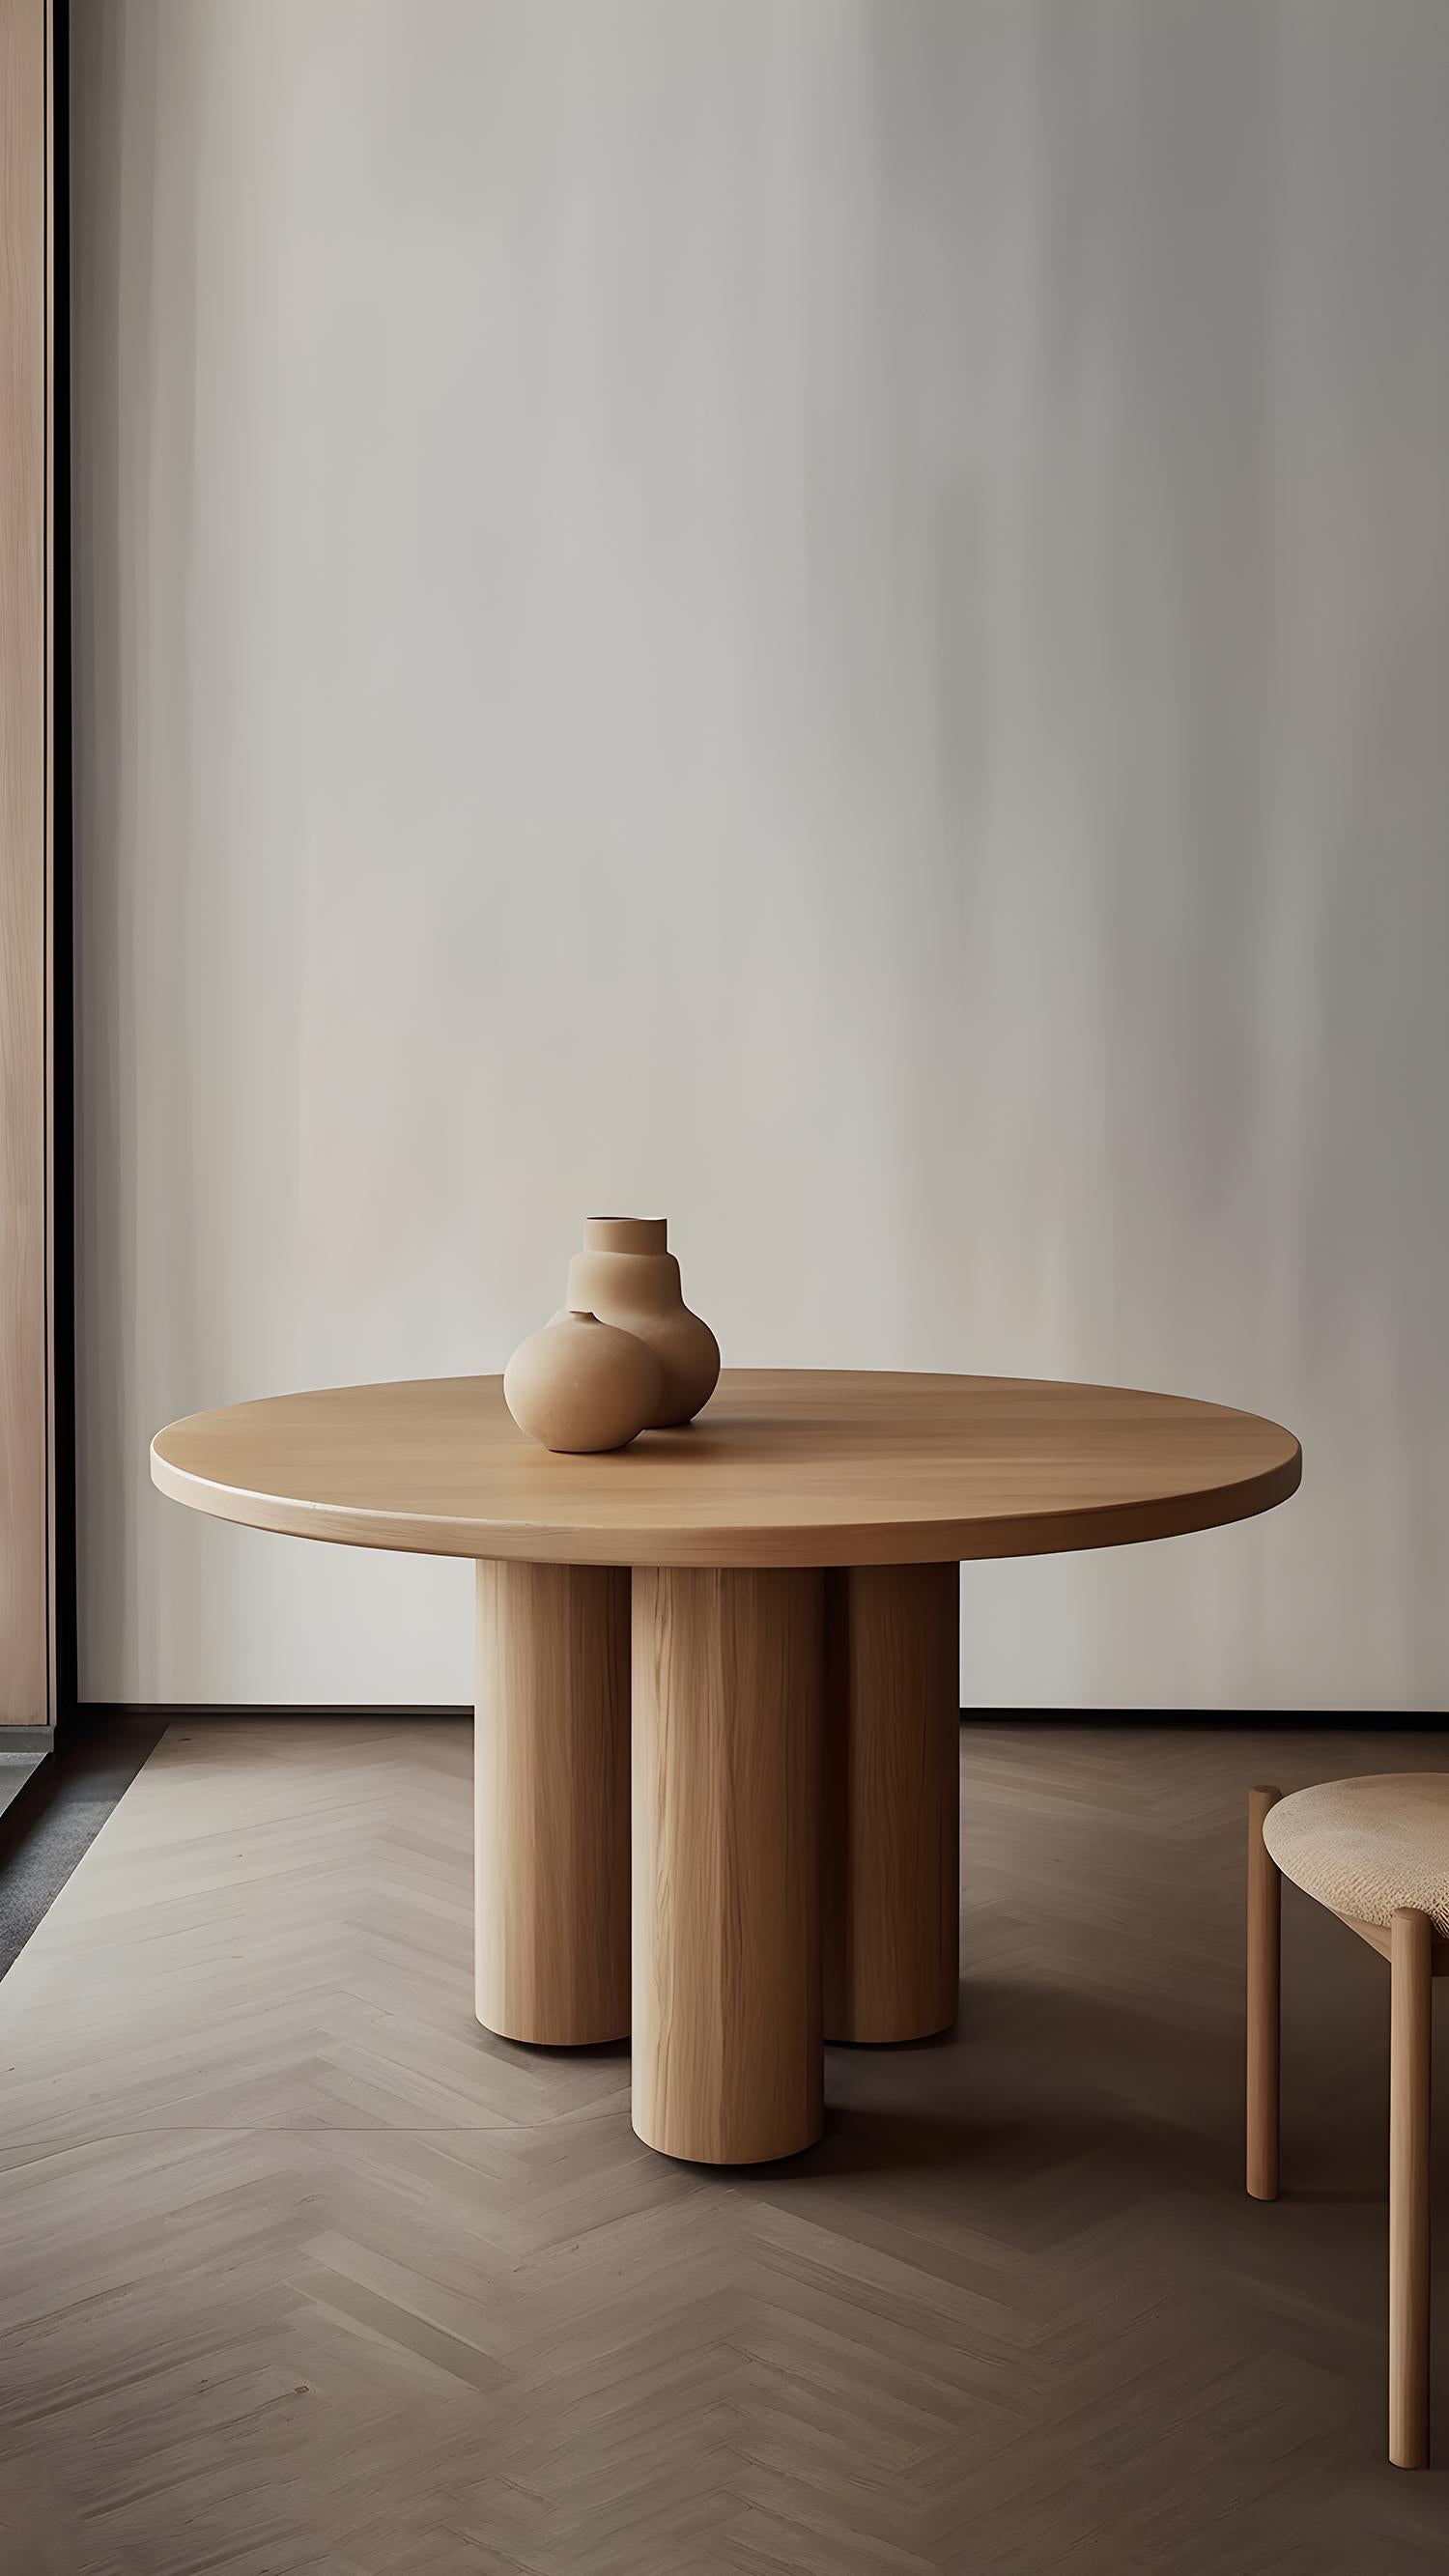 Mexican Brutalist Round Dining Table in Wood Veneer, Podio by NONO For Sale